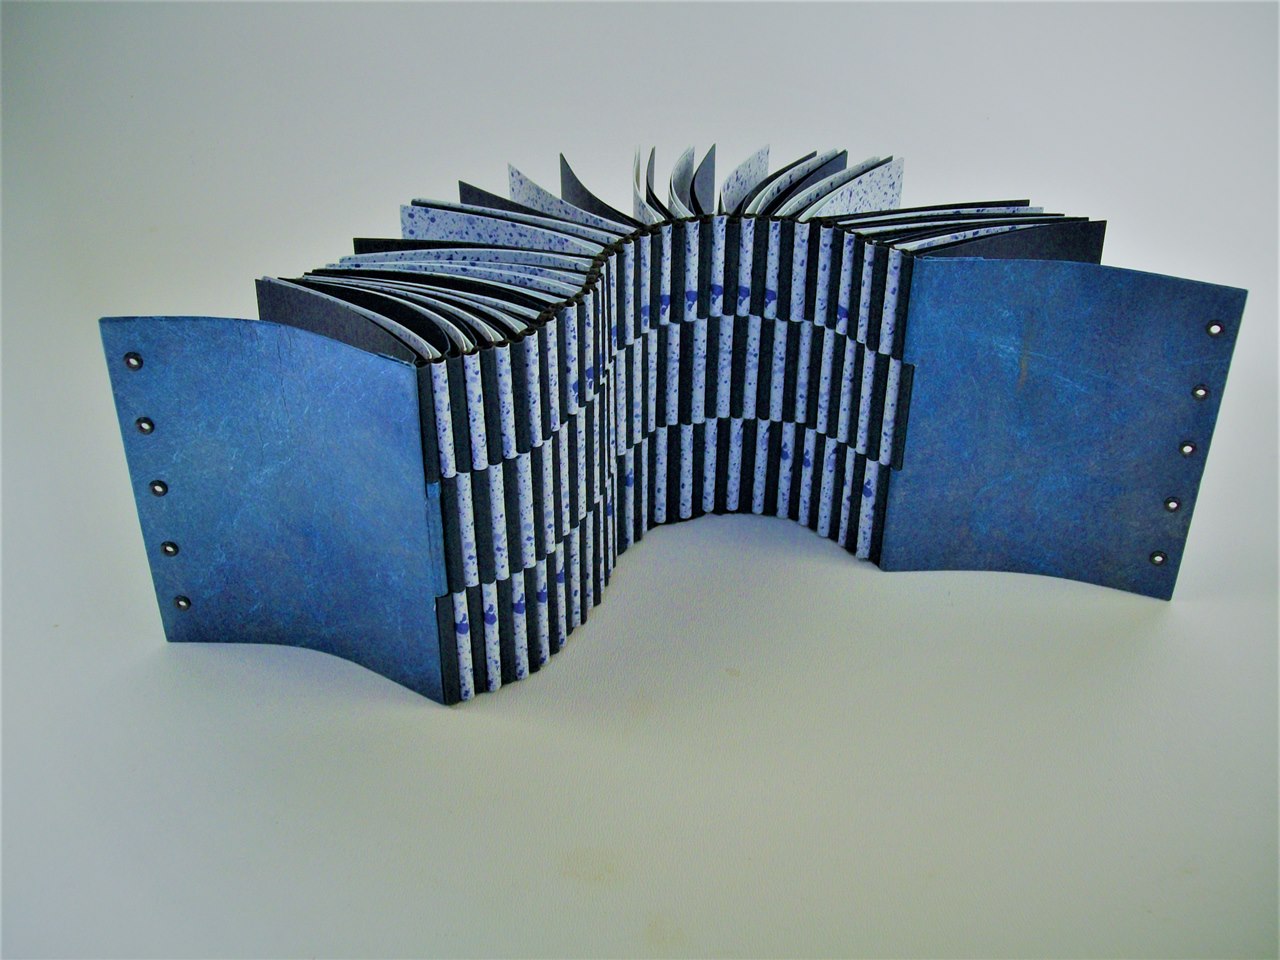 hinged book - from workshop (5)